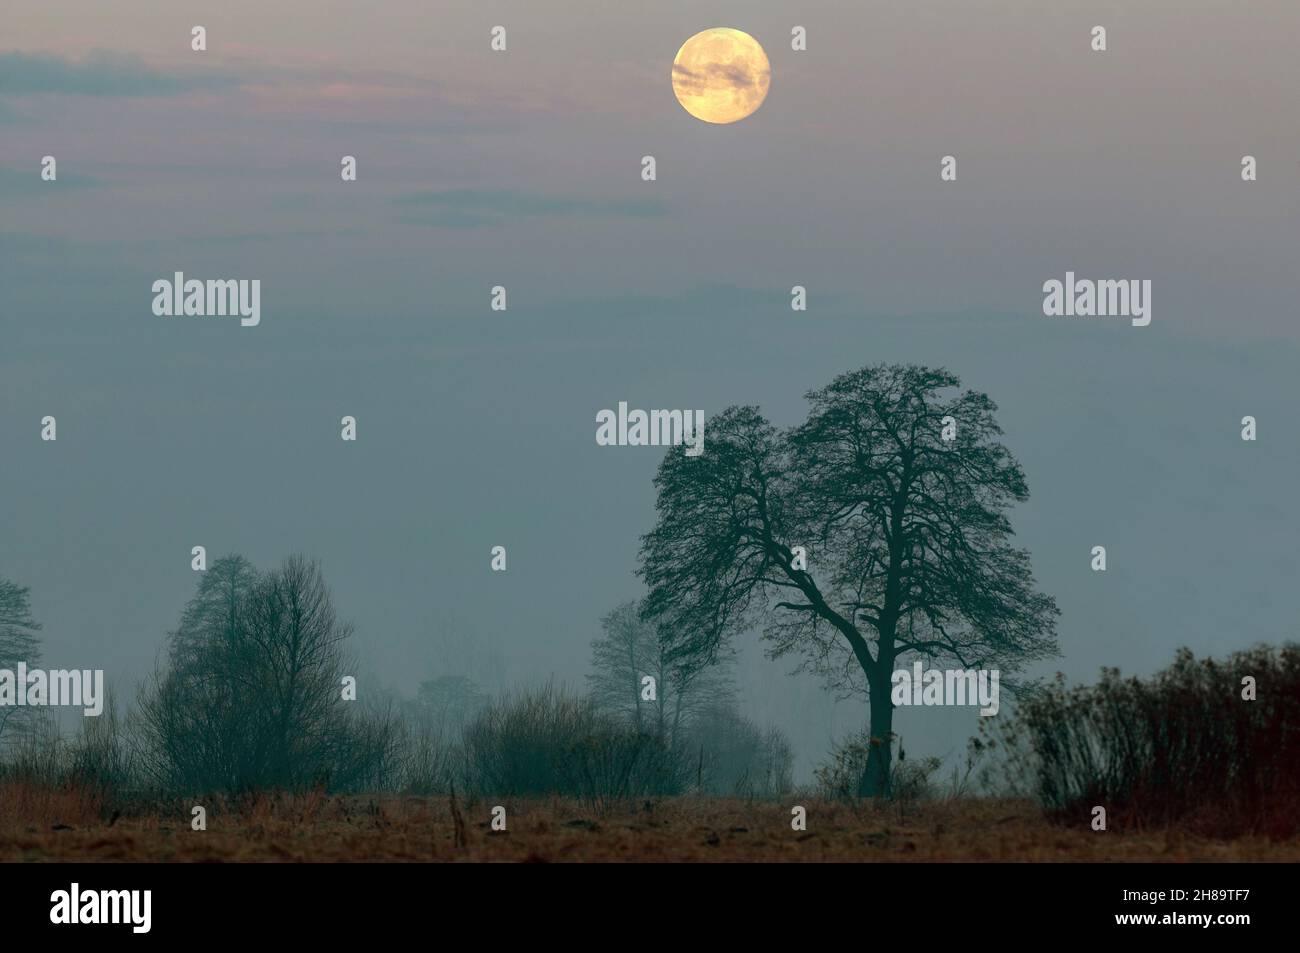 Moon rising above a tree and landscape in early evening Stock Photo